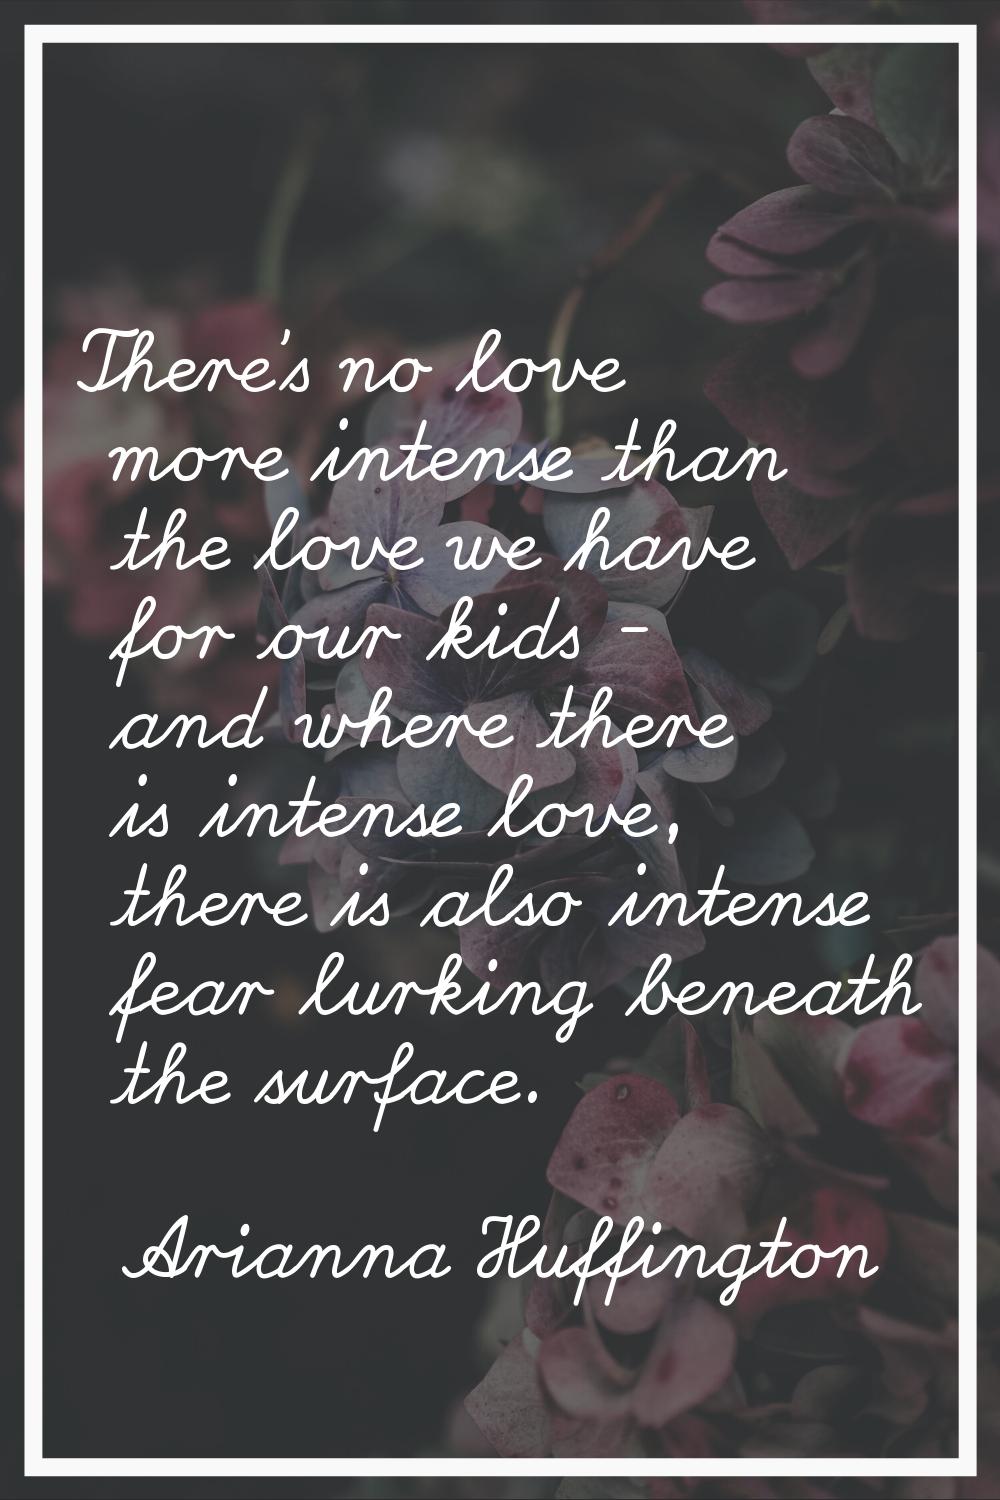 There's no love more intense than the love we have for our kids - and where there is intense love, 